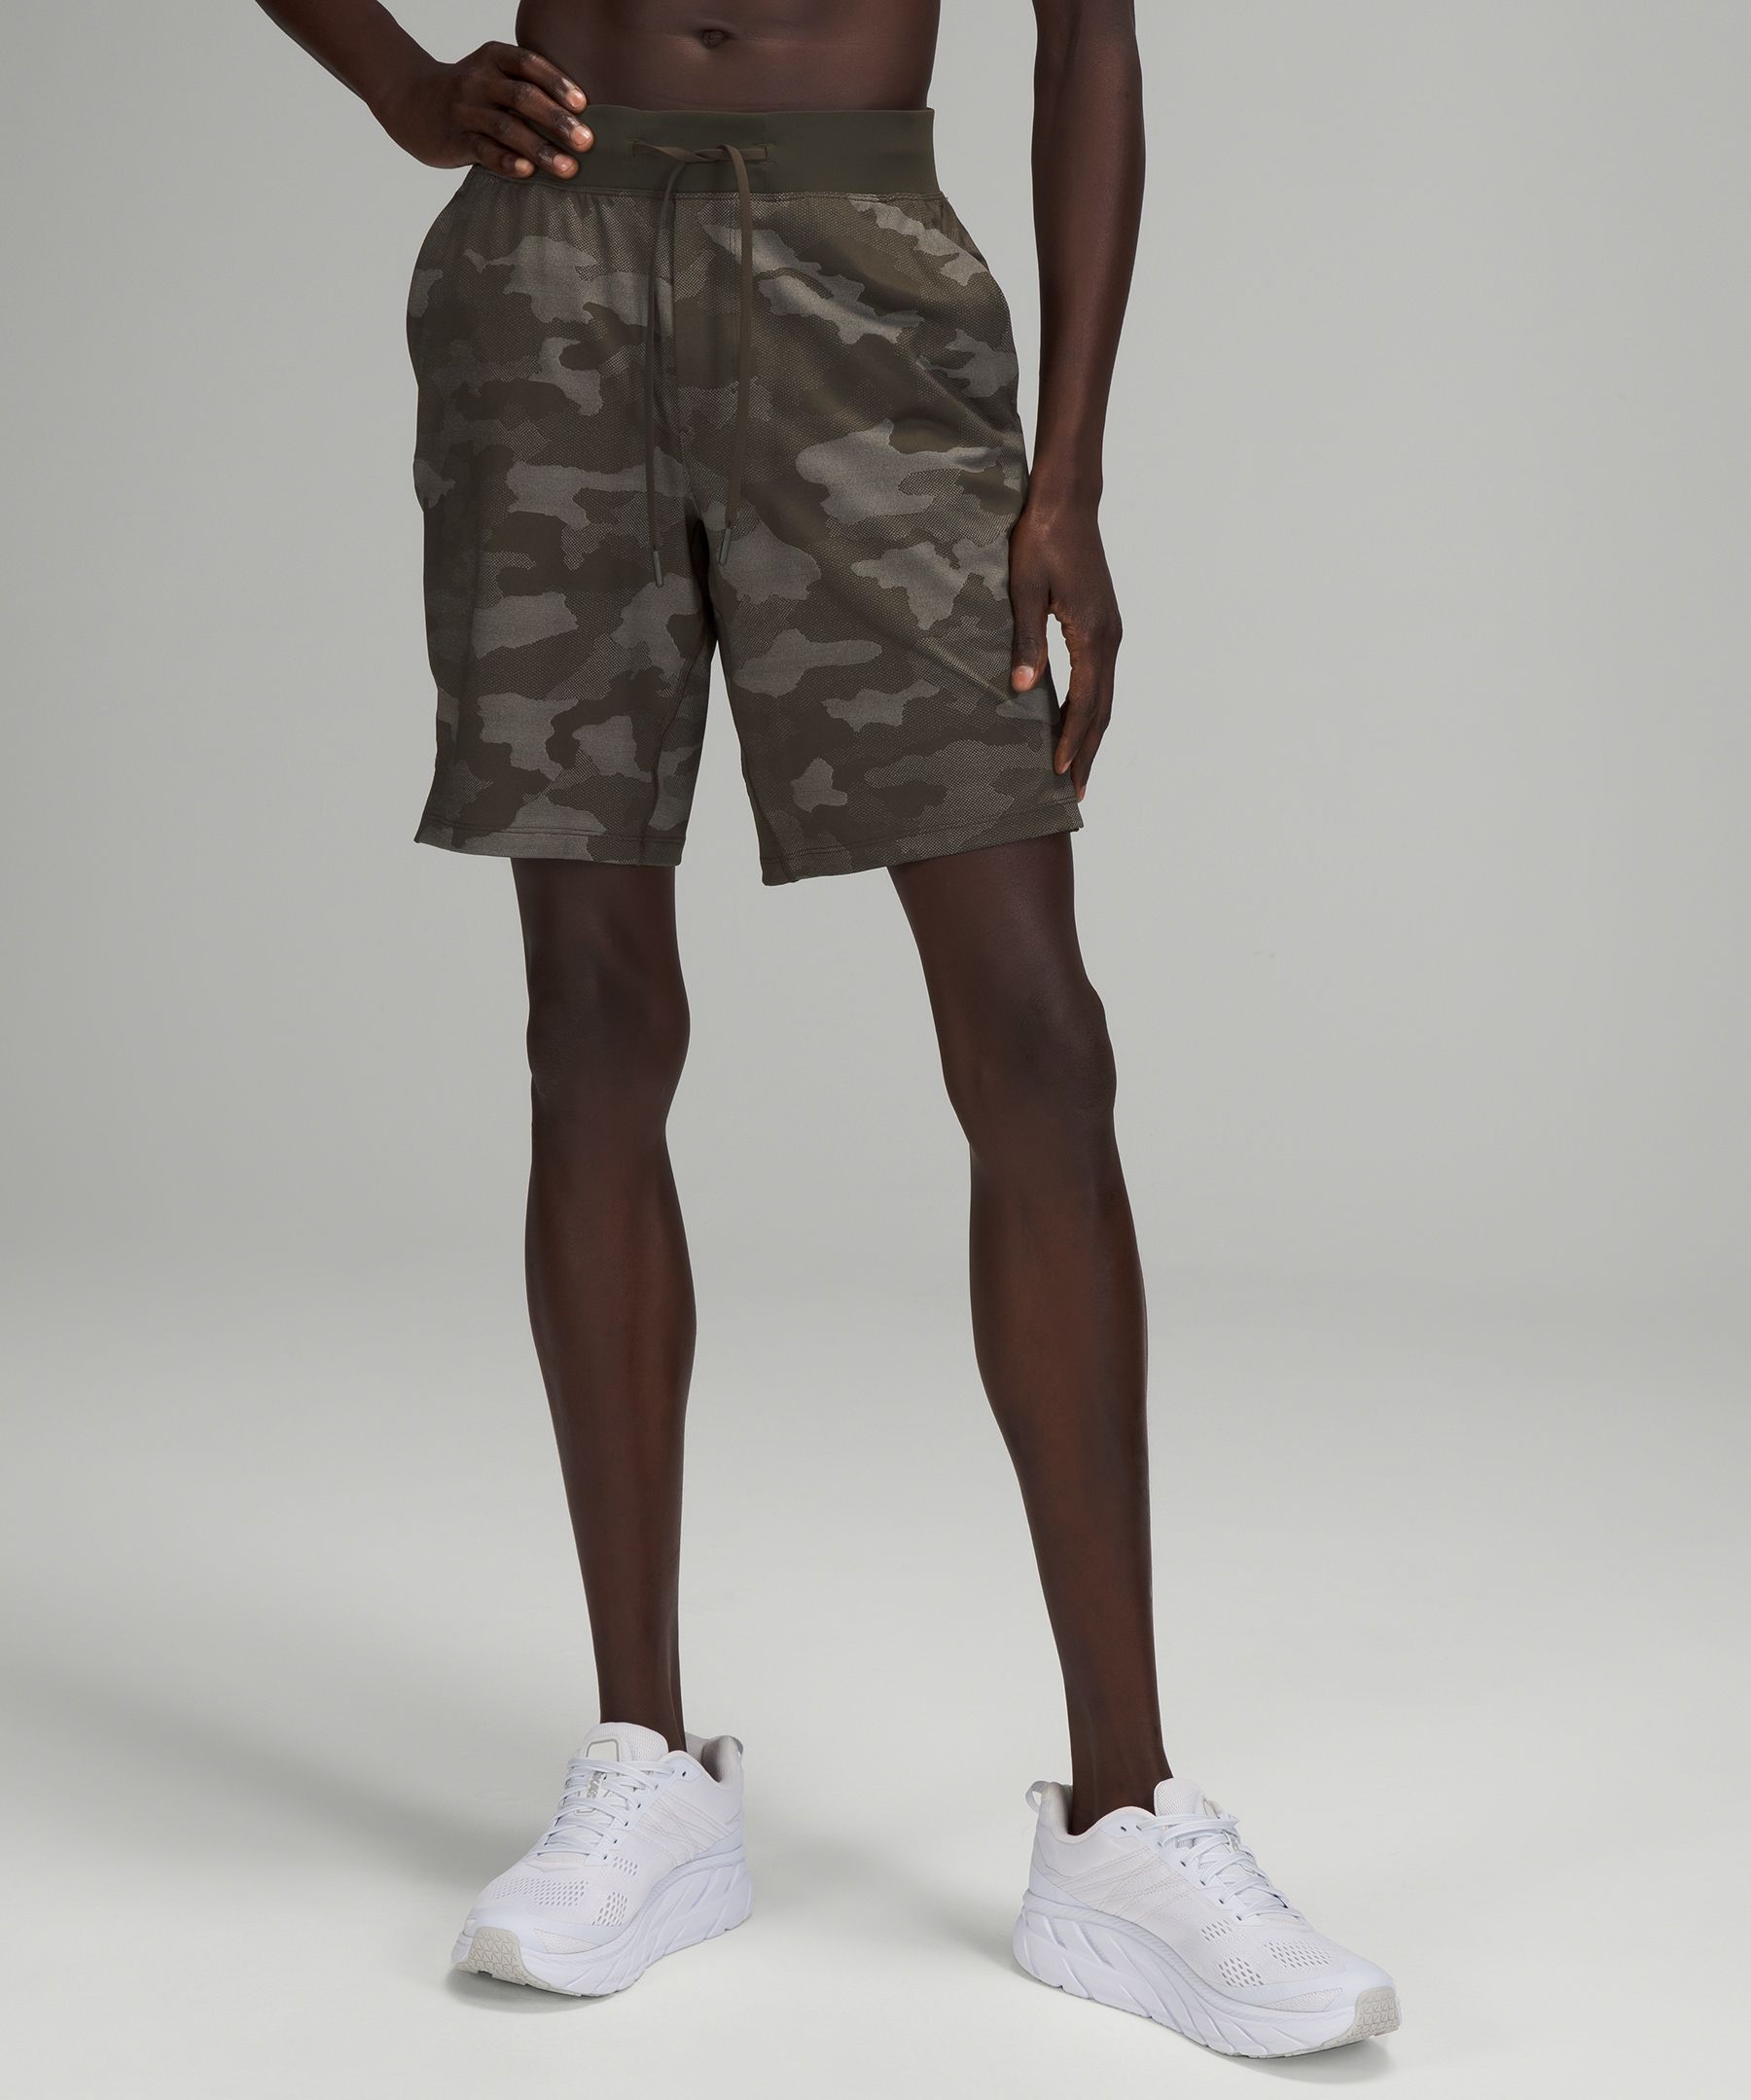 Lululemon T.h.e. Linerless Shorts 9" In Variegated Mesh Camo Max Dark Olive